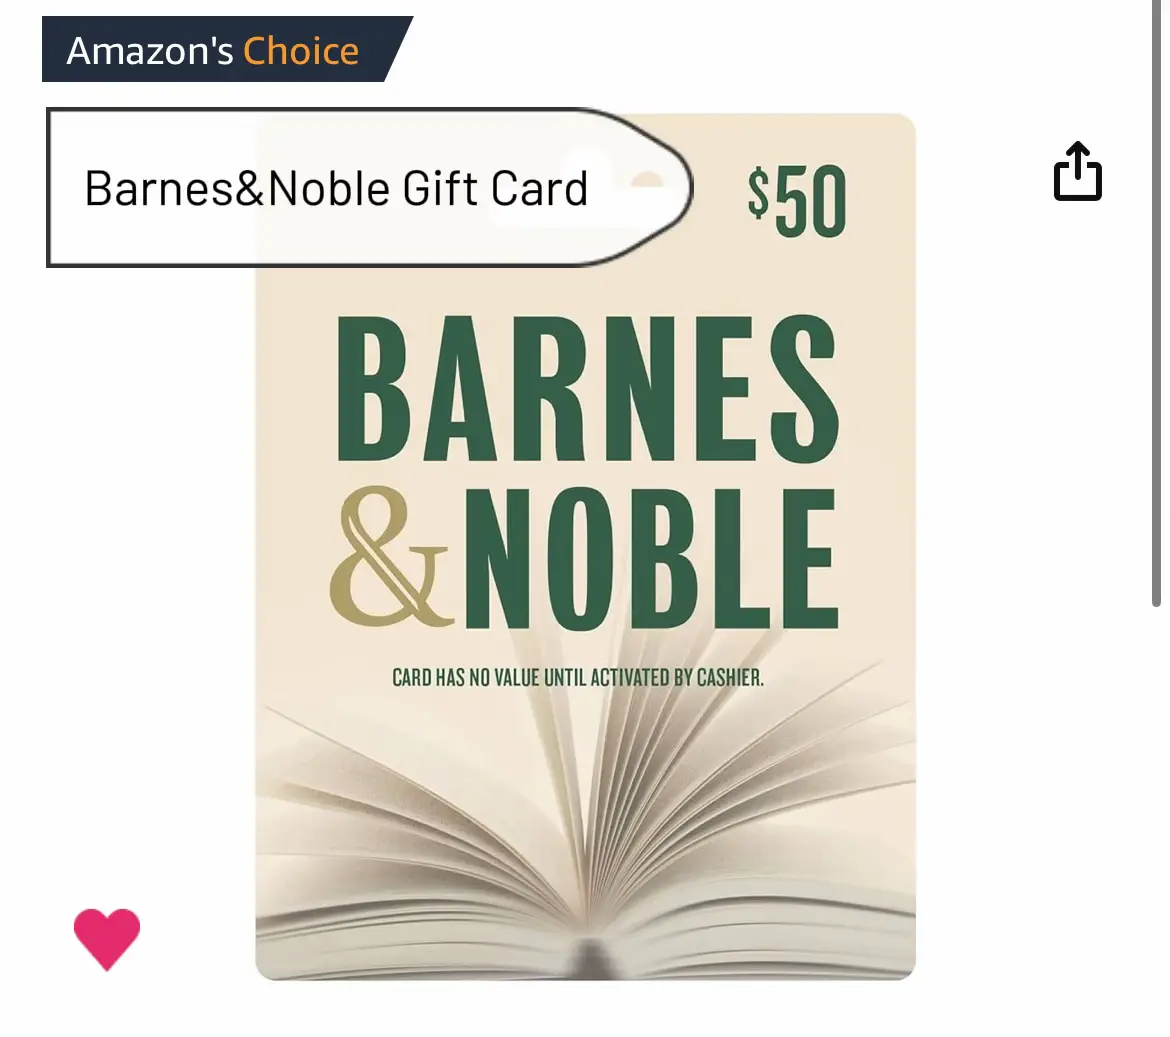  A Barnes & Noble gift card is being held in a hand.